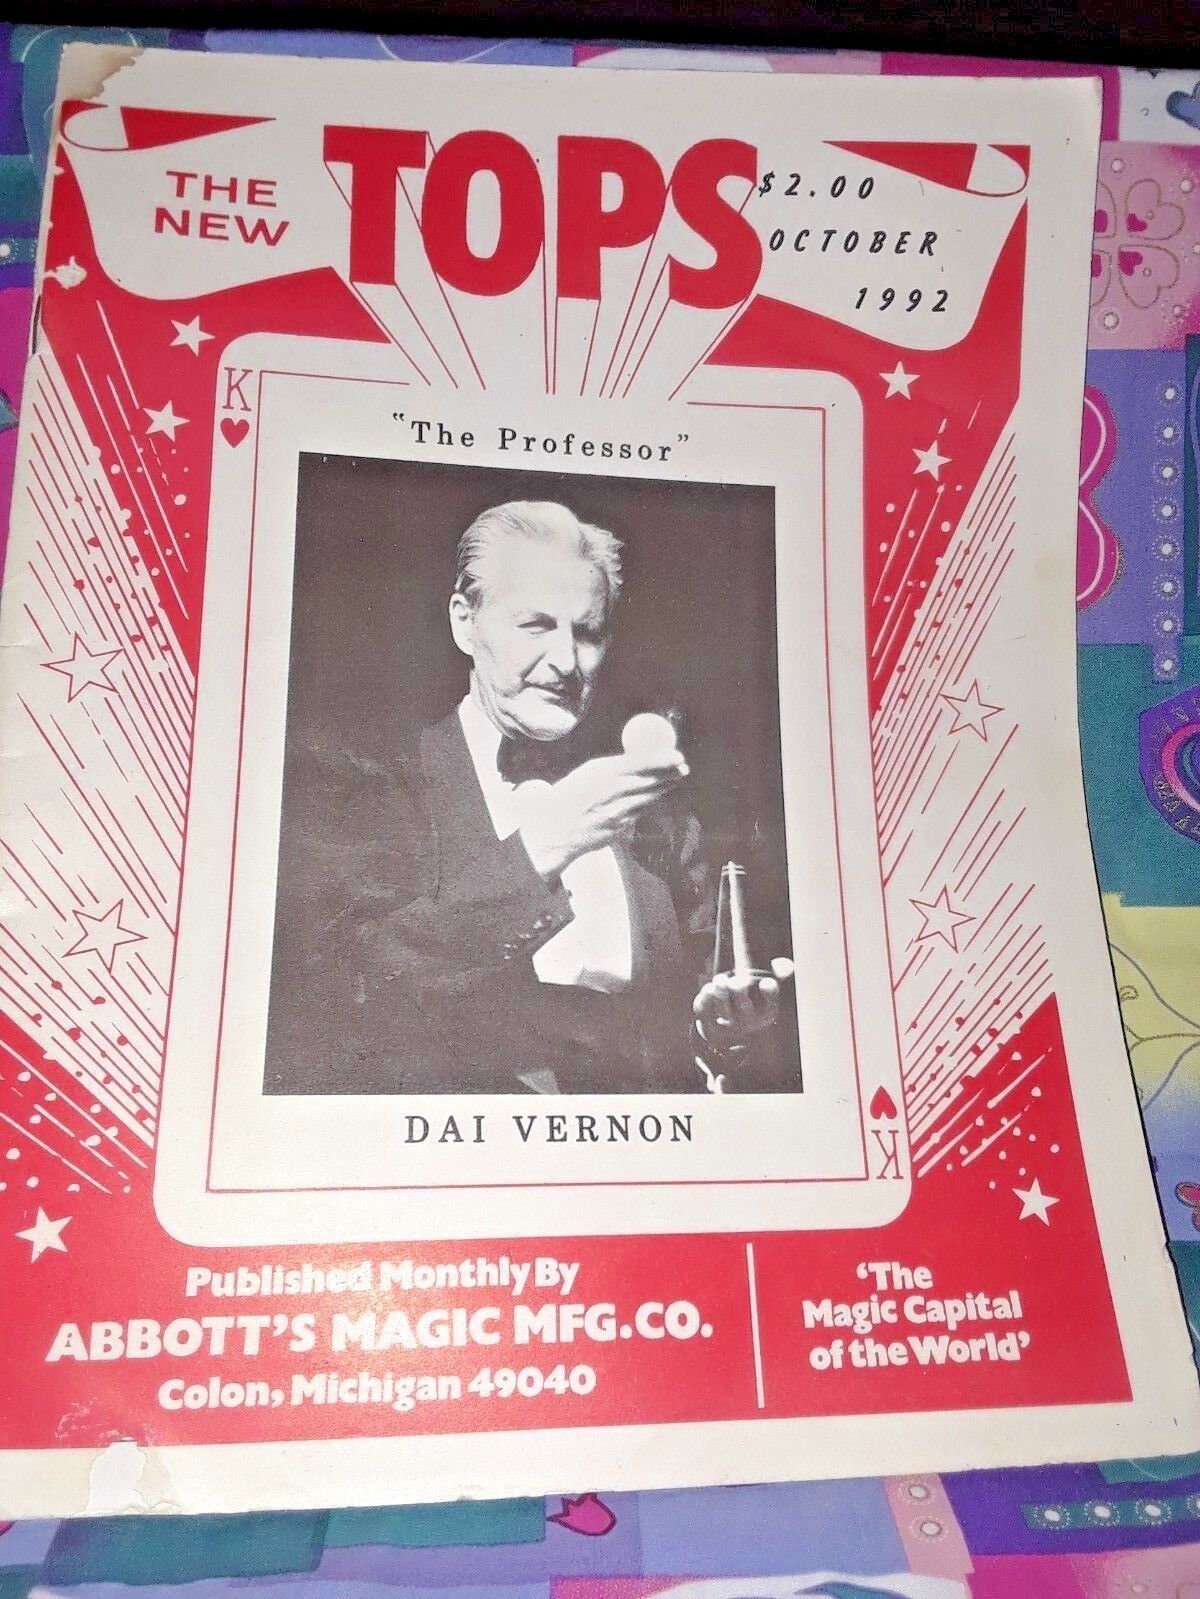 4 VINTAGE MAGIC THE NEW TOPS MAGAZINE PUBLISHED BY abbott's 1986-87-88-92 Без бренда